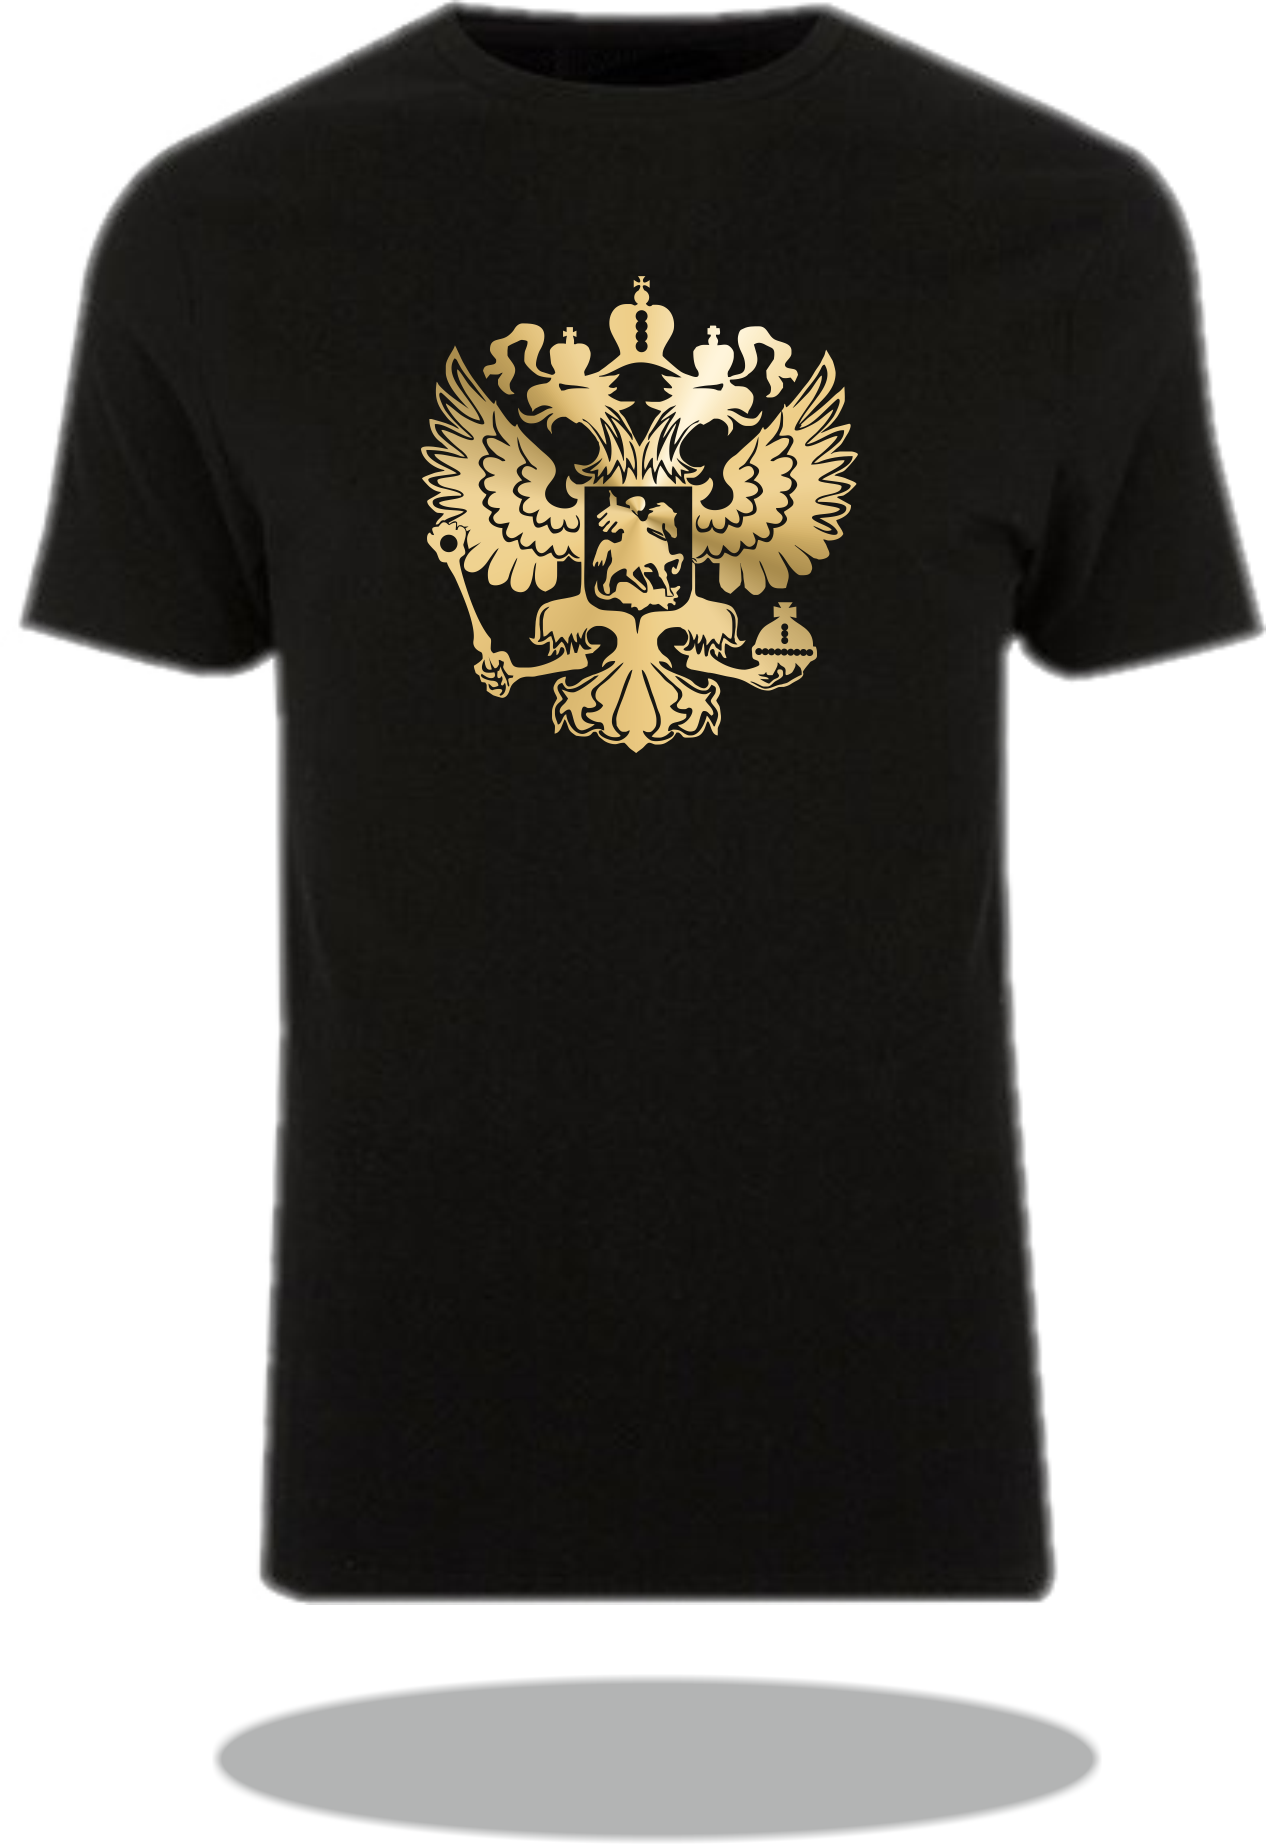 T-Shirt Wappen Russland / Russia Coat of Arms